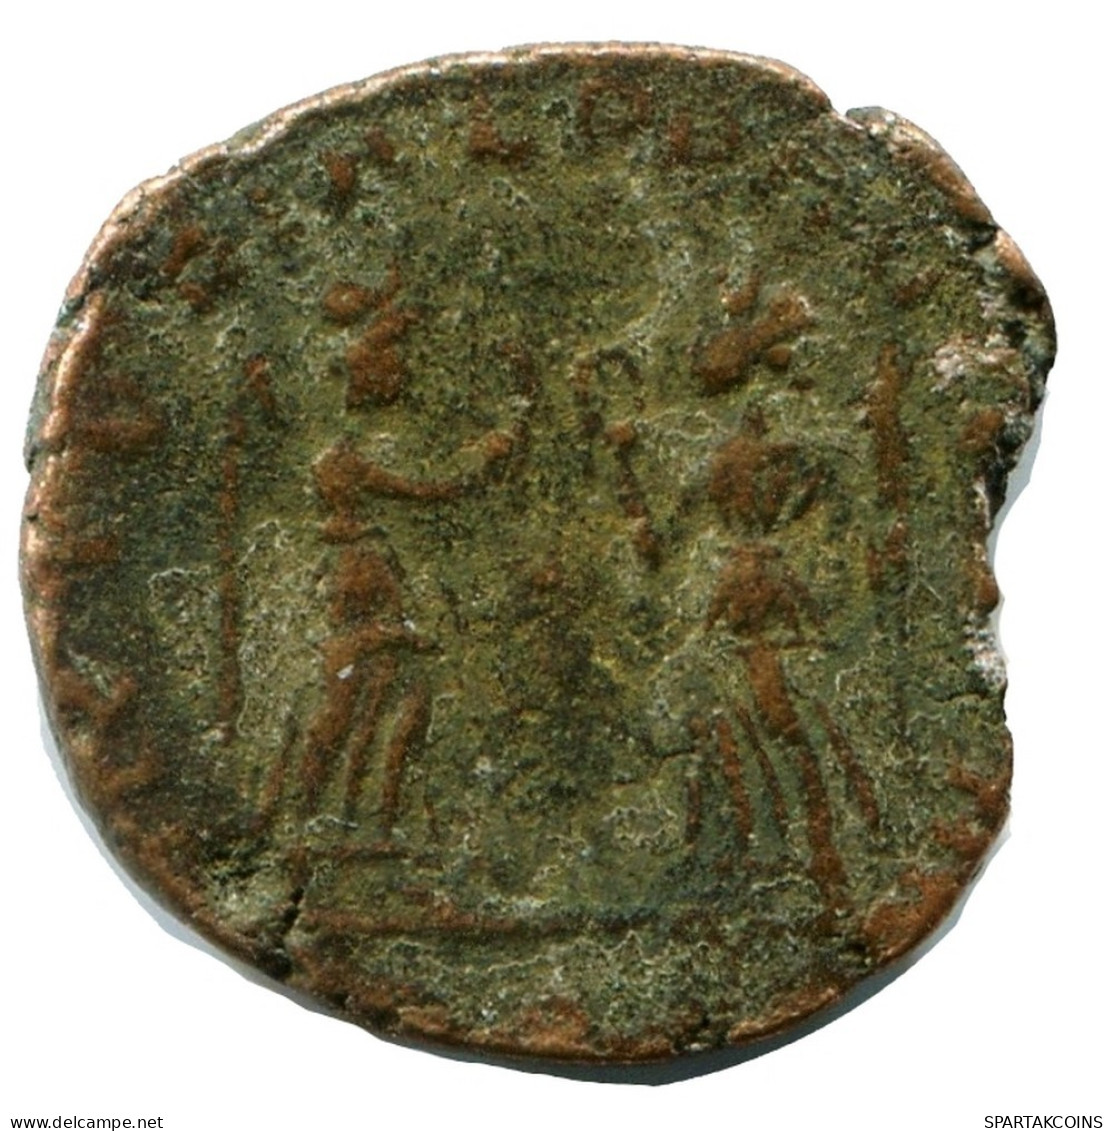 CONSTANS MINTED IN ROME ITALY FOUND IN IHNASYAH HOARD EGYPT #ANC11527.14.F.A - L'Empire Chrétien (307 à 363)